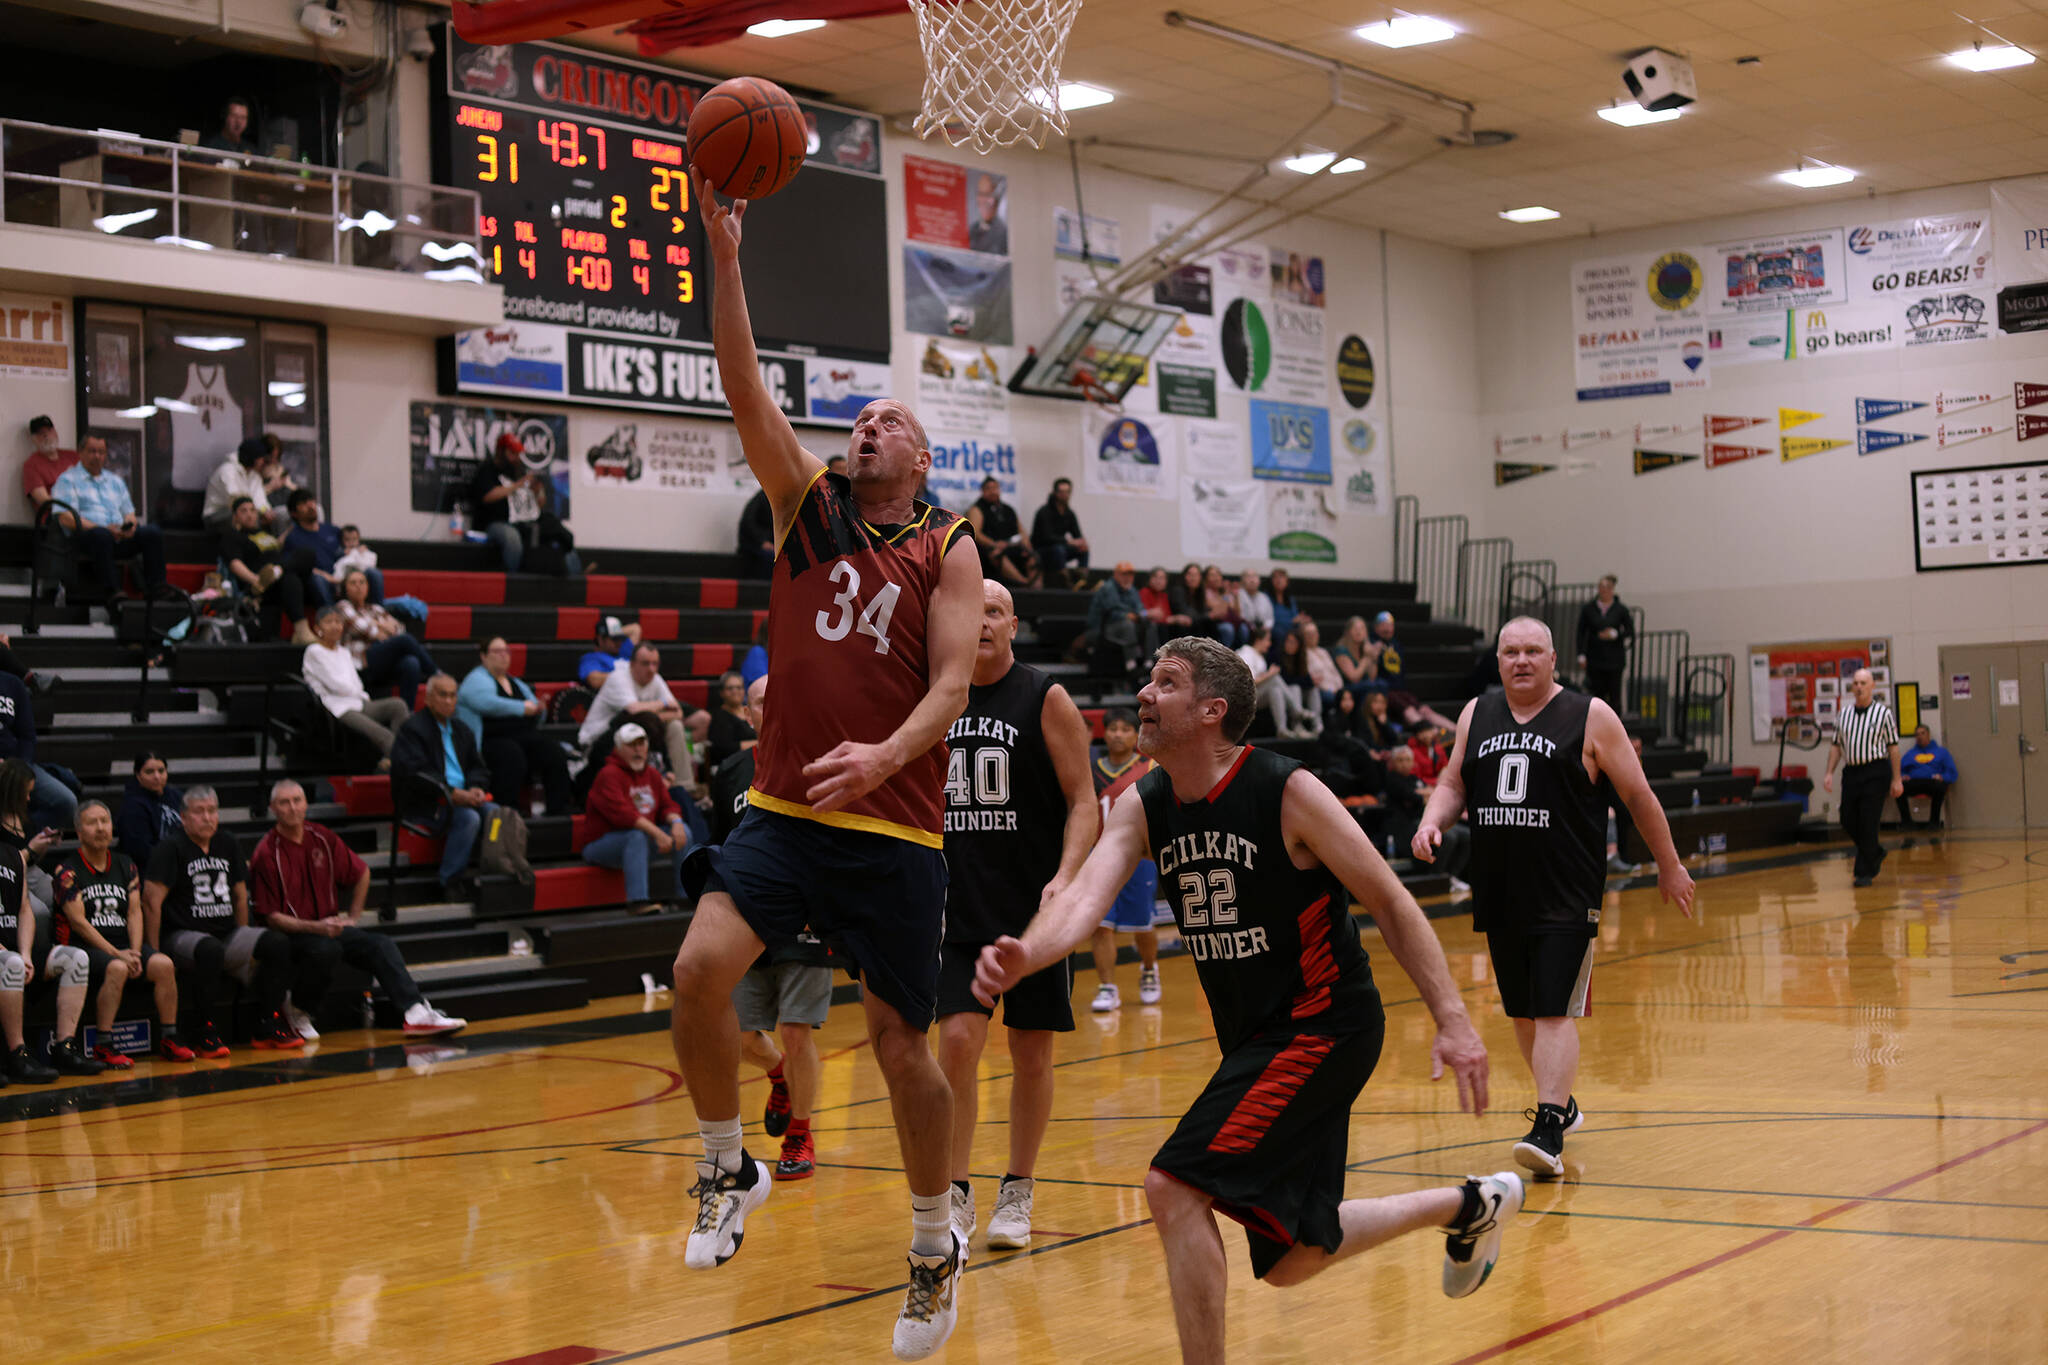 Daylight Saving Time just started, but Juneau's Jim Carson turned back the clock late in the second quarter of a Masters Bracket game against Klukwan. Carson finished the Thursday night contest with 16 points, and Juneau prevailed 48-39. (Ben Hohenstatt / Juneau Empire)